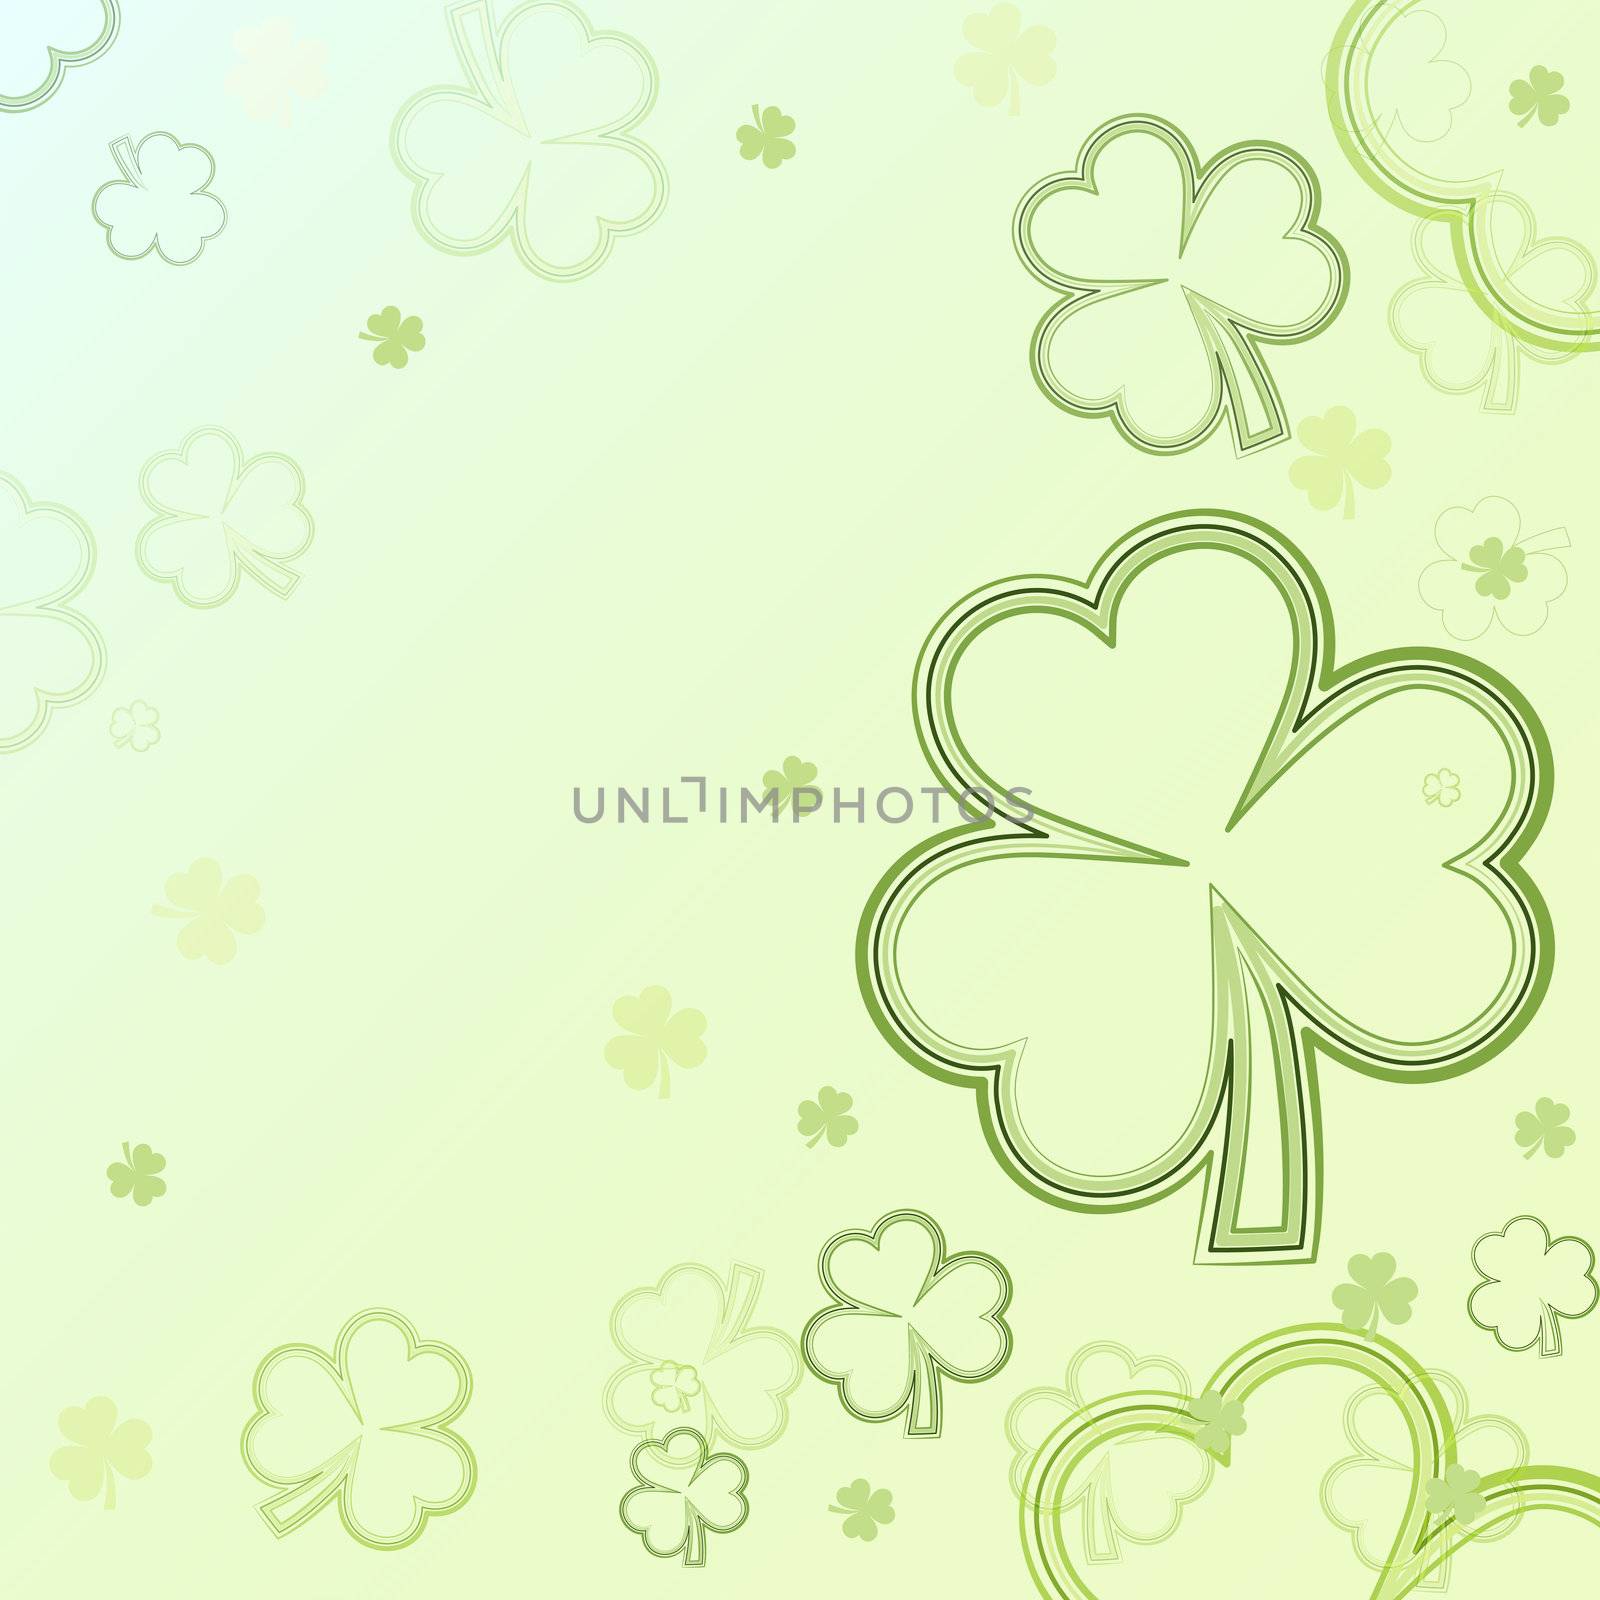 shamrocks - green contours of flowers, background with light clovers, spring card